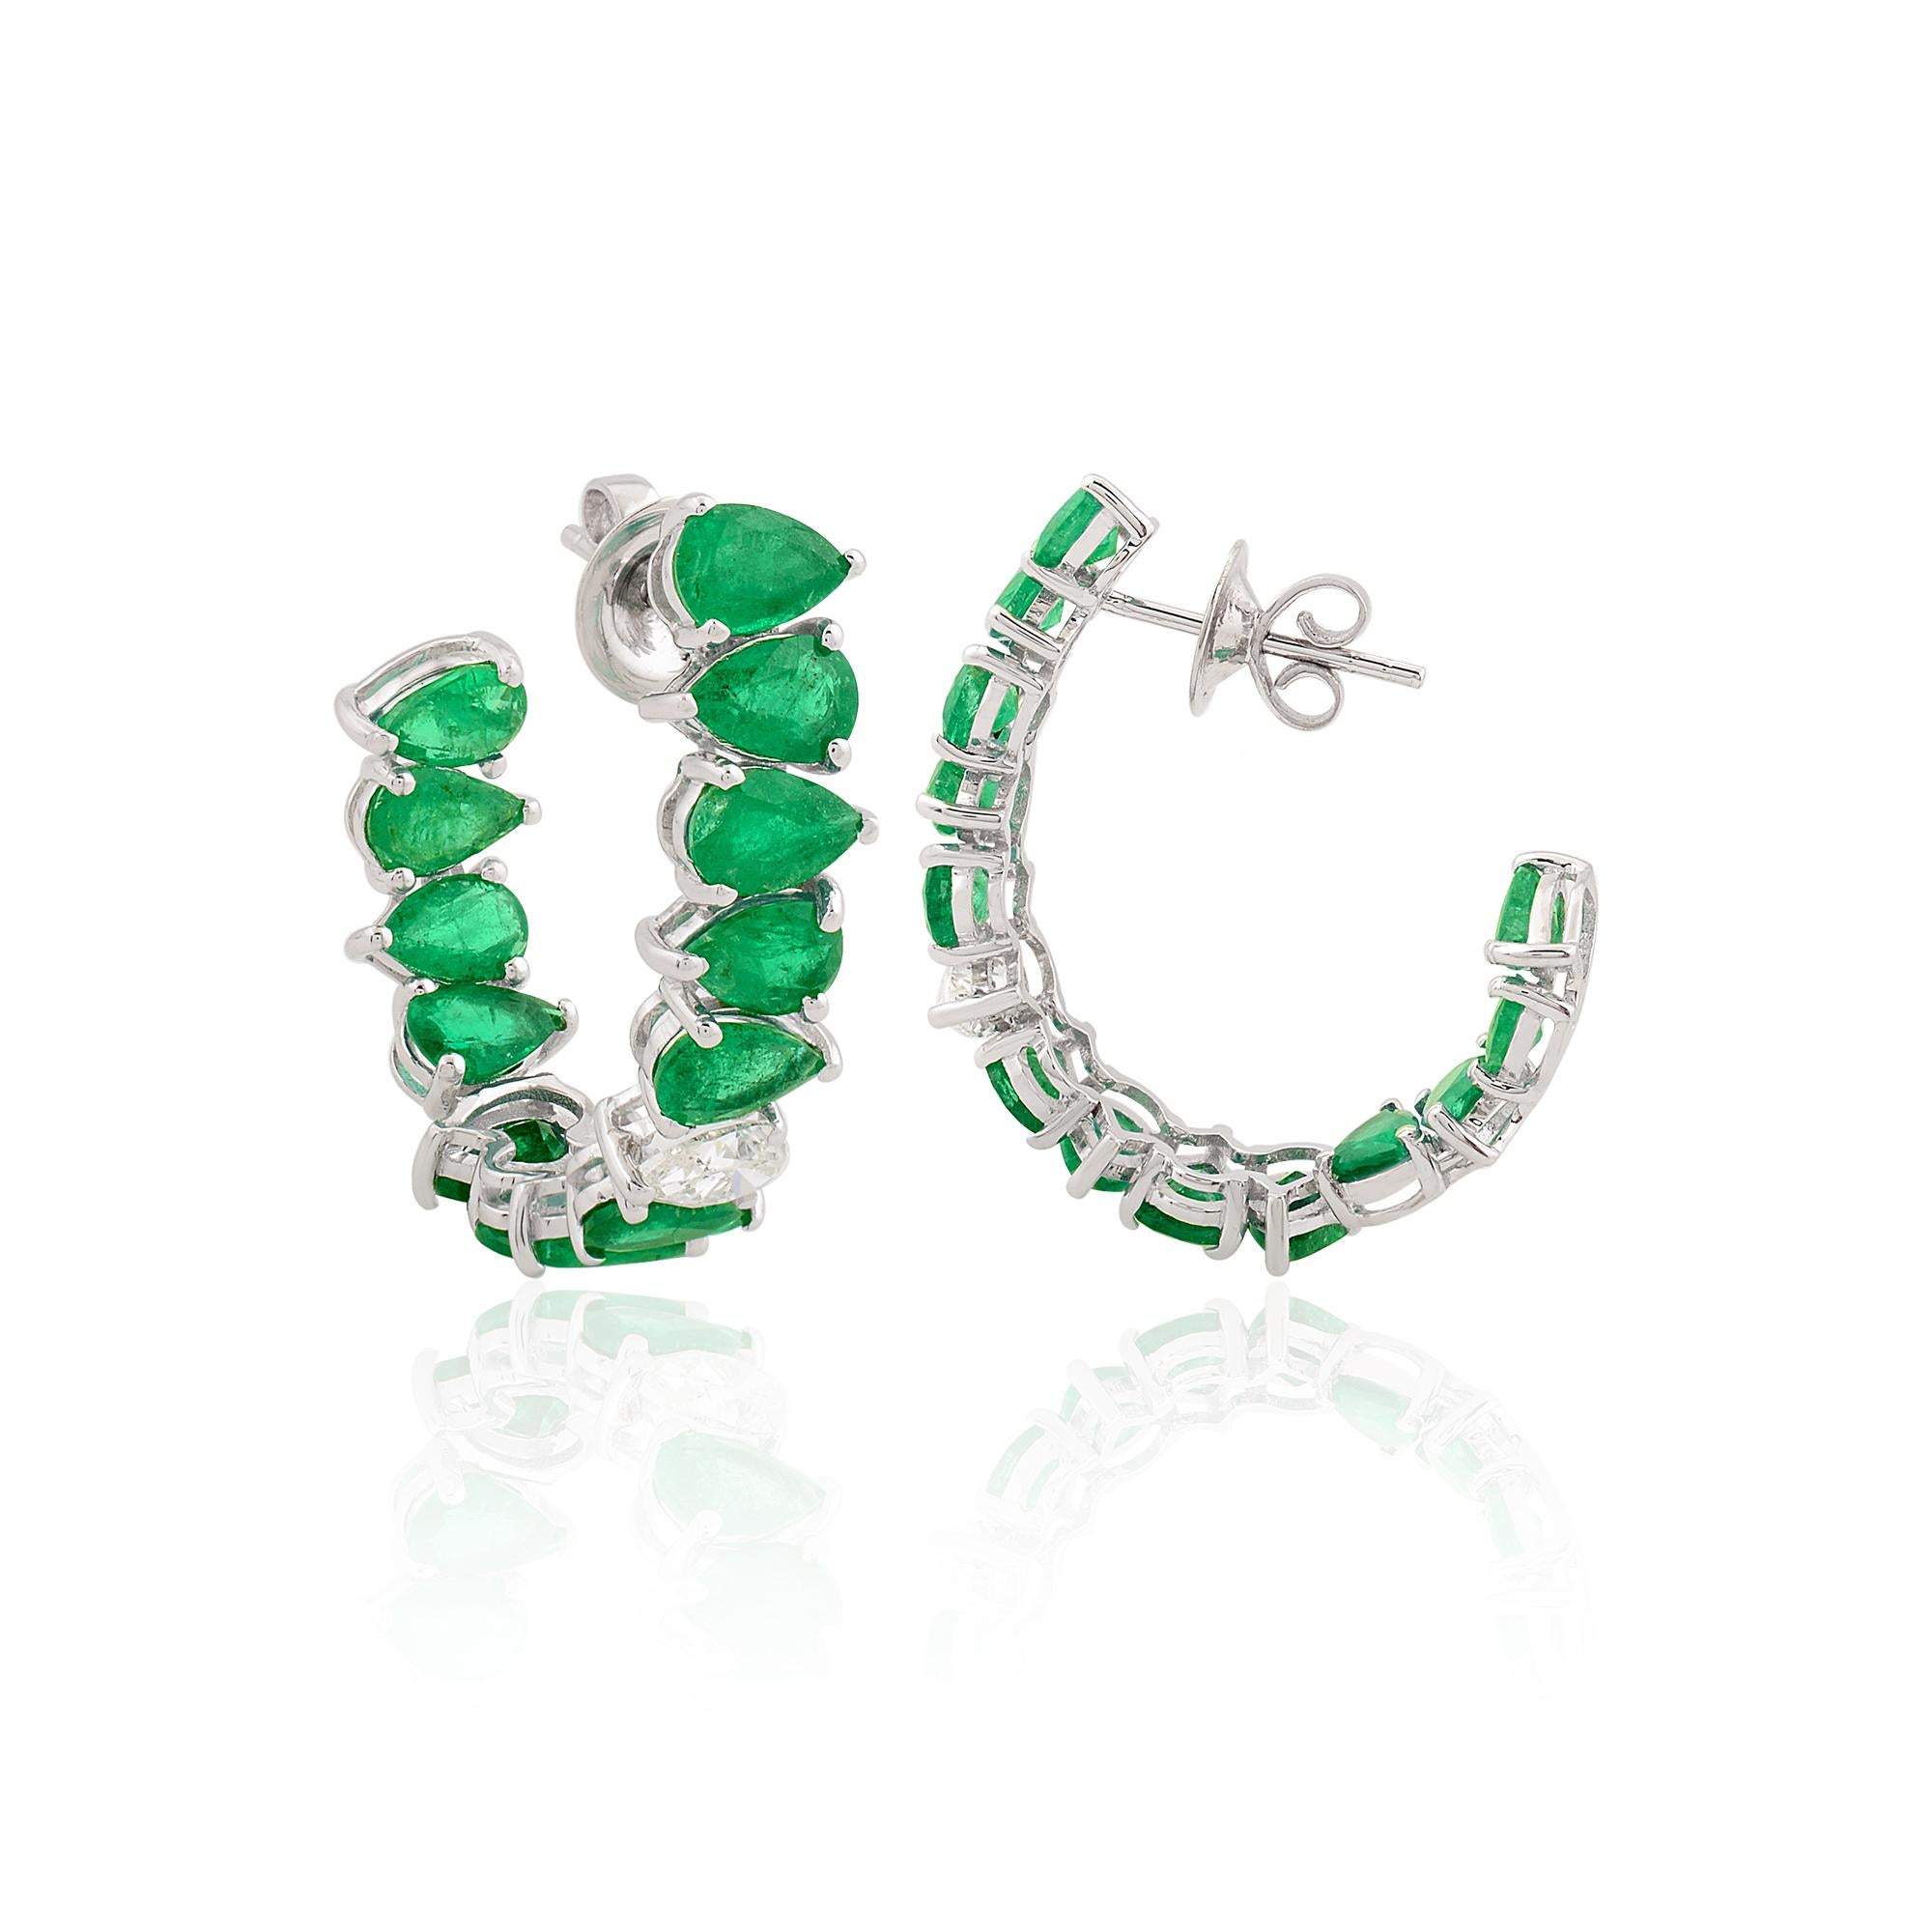 Item Code :- SEE-1639A (14k)
Gross Wt :- 6.74 gm 
14k Solid White Gold Wt :- 4.73 gm
Natural Diamond Wt :- 0.80 ct ( AVERAGE DIAMOND CLARITY SI1-SI2 & COLOR H-I )
Emerald Wt :- 9.24 ct
Earrings Size :- 32x20 mm approx.

✦